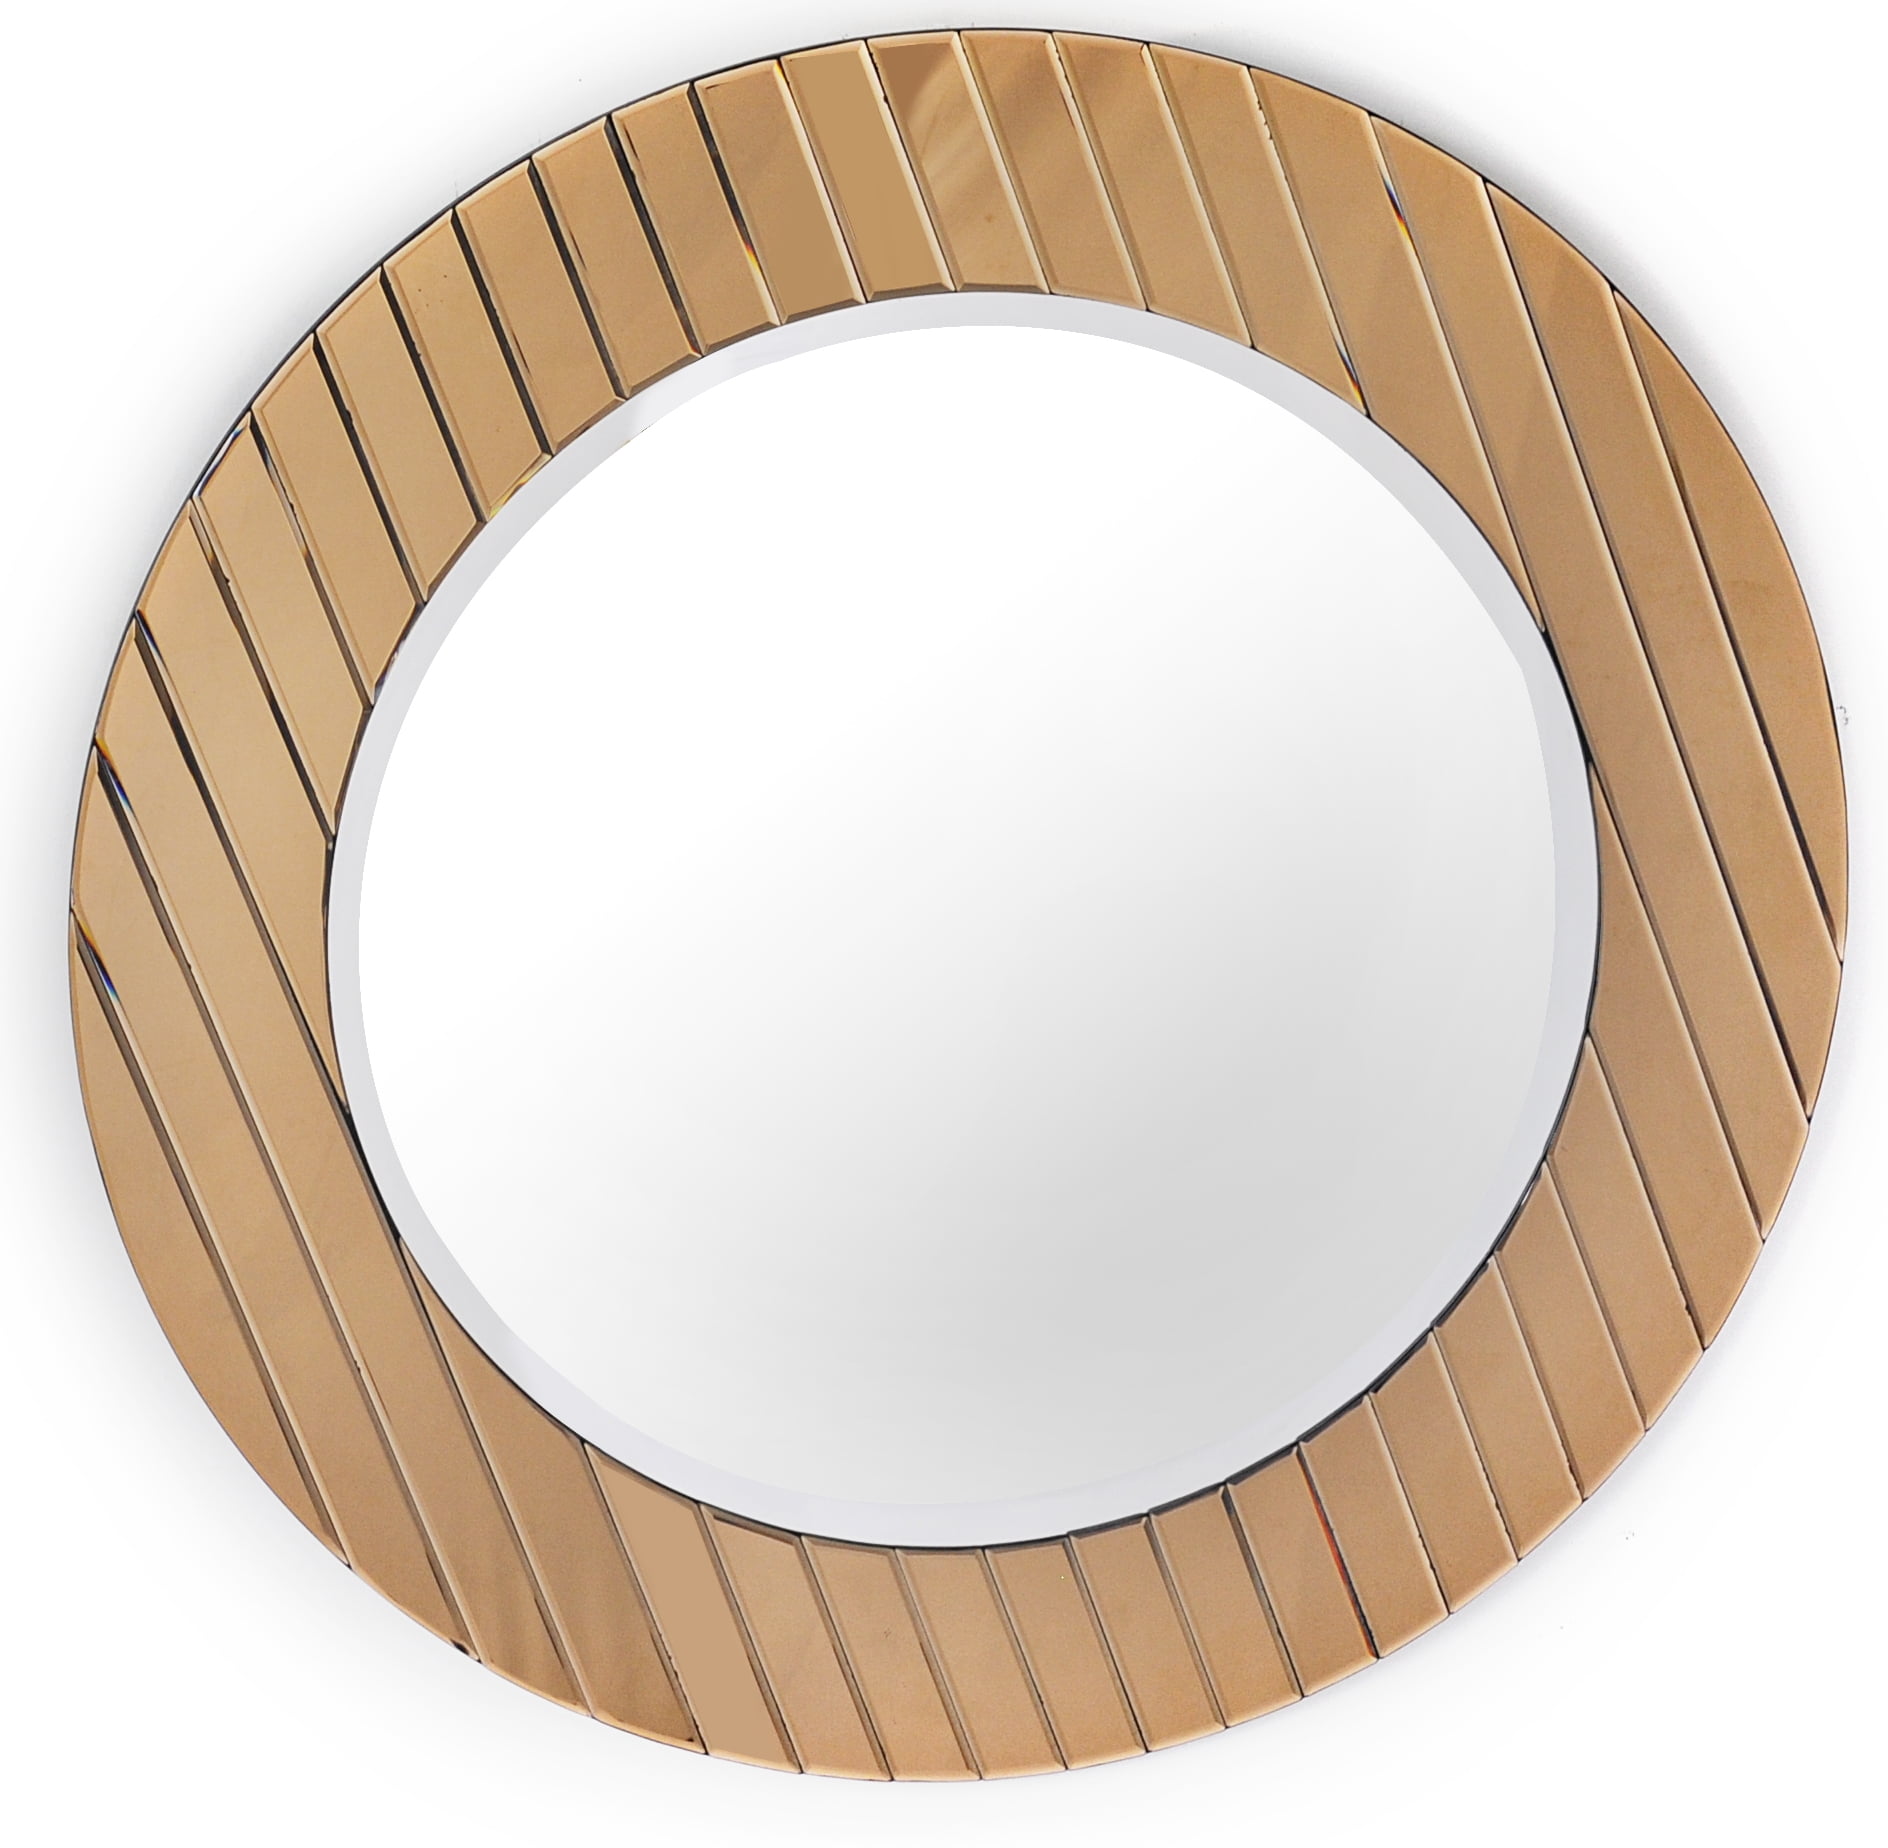 Picture of Camden Isle 86337 35.4 x 35.4 in. Yukon Gold Beveled Accent Mirror